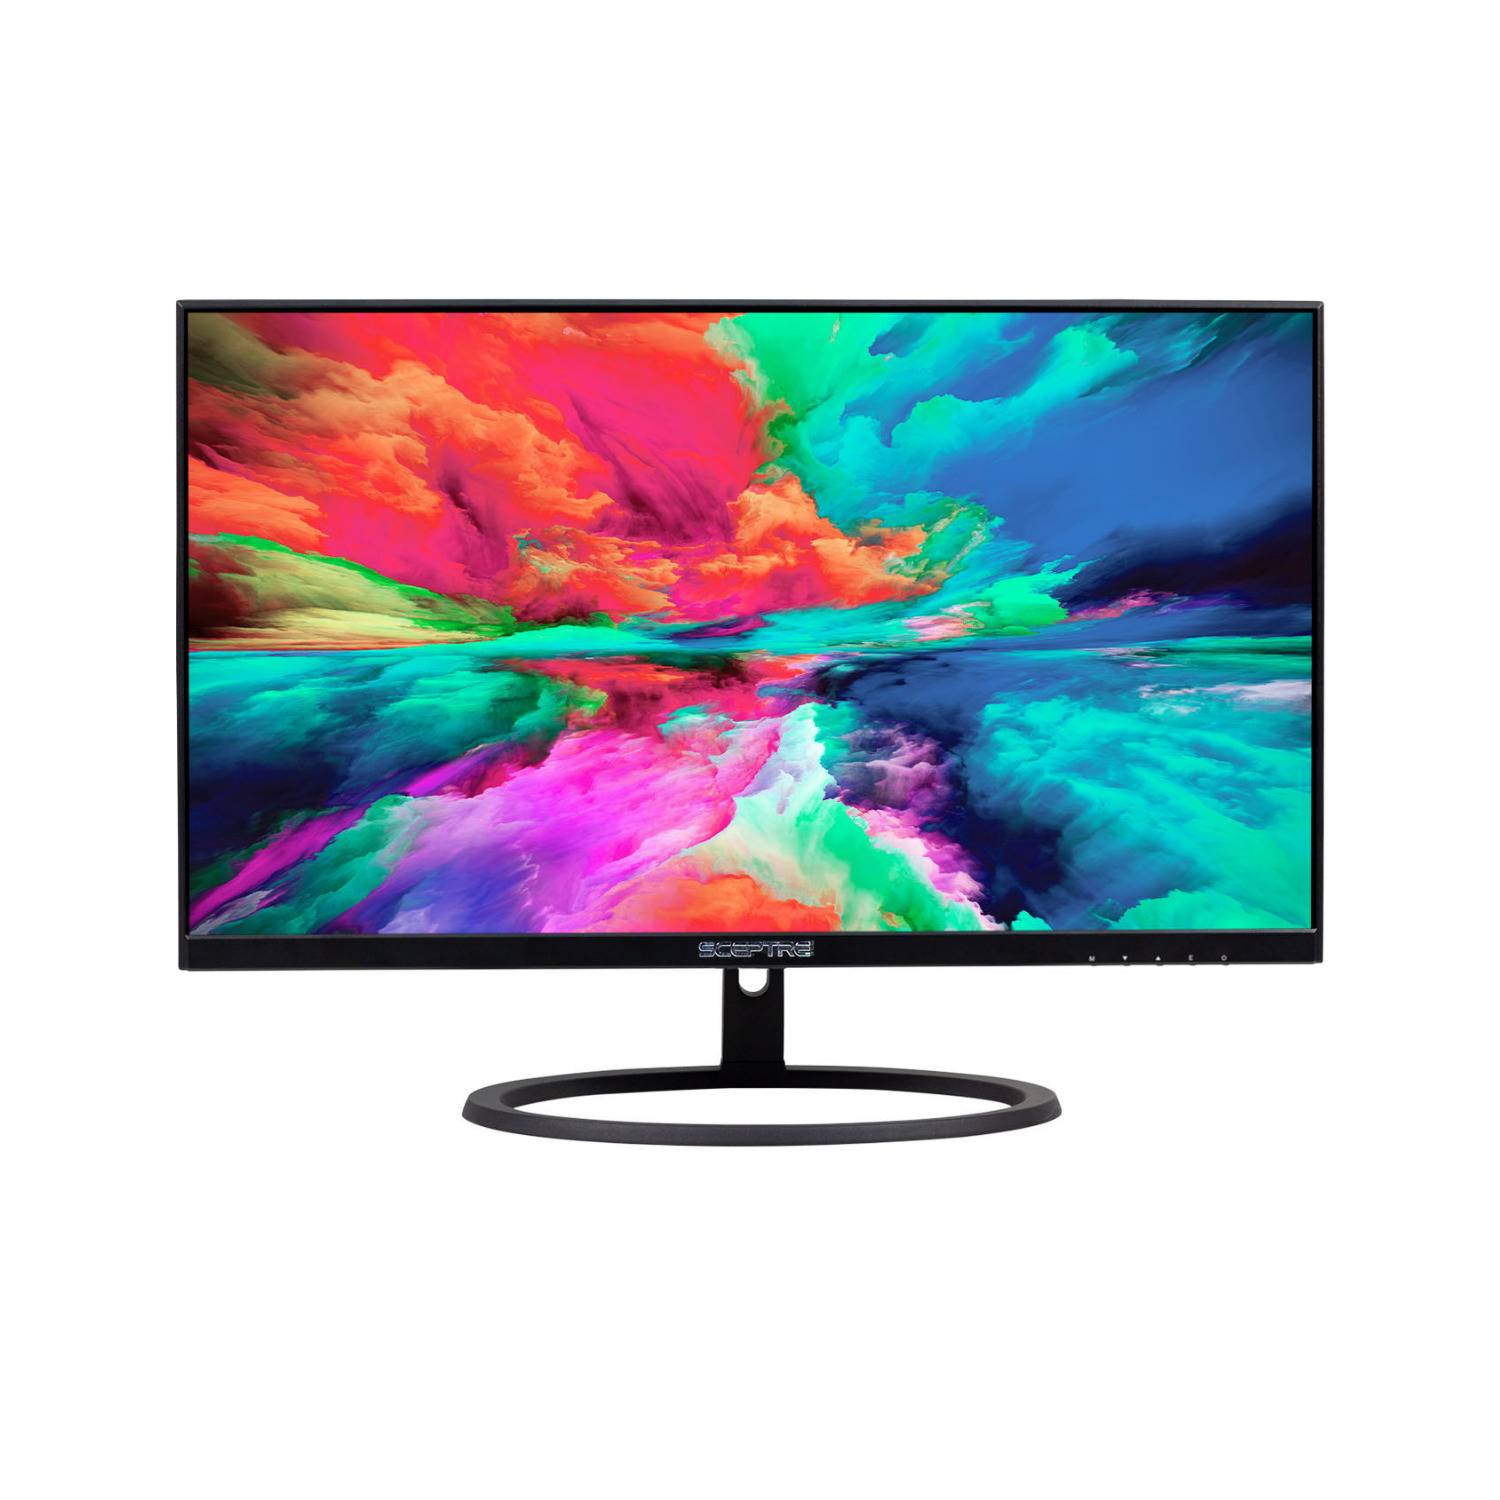 Sceptre IPS E275W-QPT 27-Inch Quad HD IPS LED Monitor with Tiltable LED Display, Edgeless Design